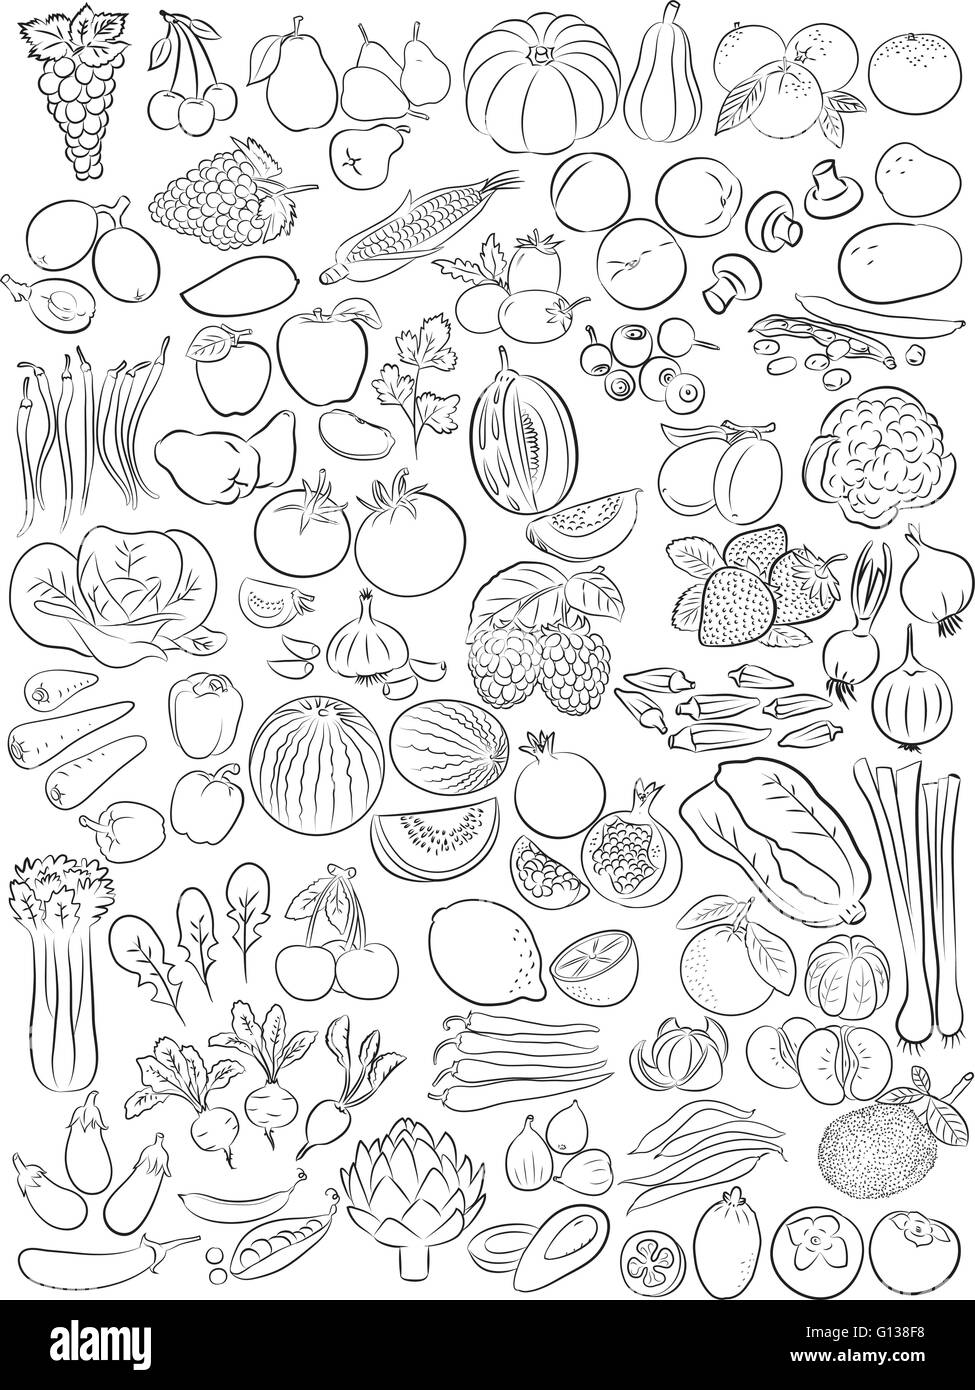 Vector illustration of fruits and vegetables in line art mode Stock Vector